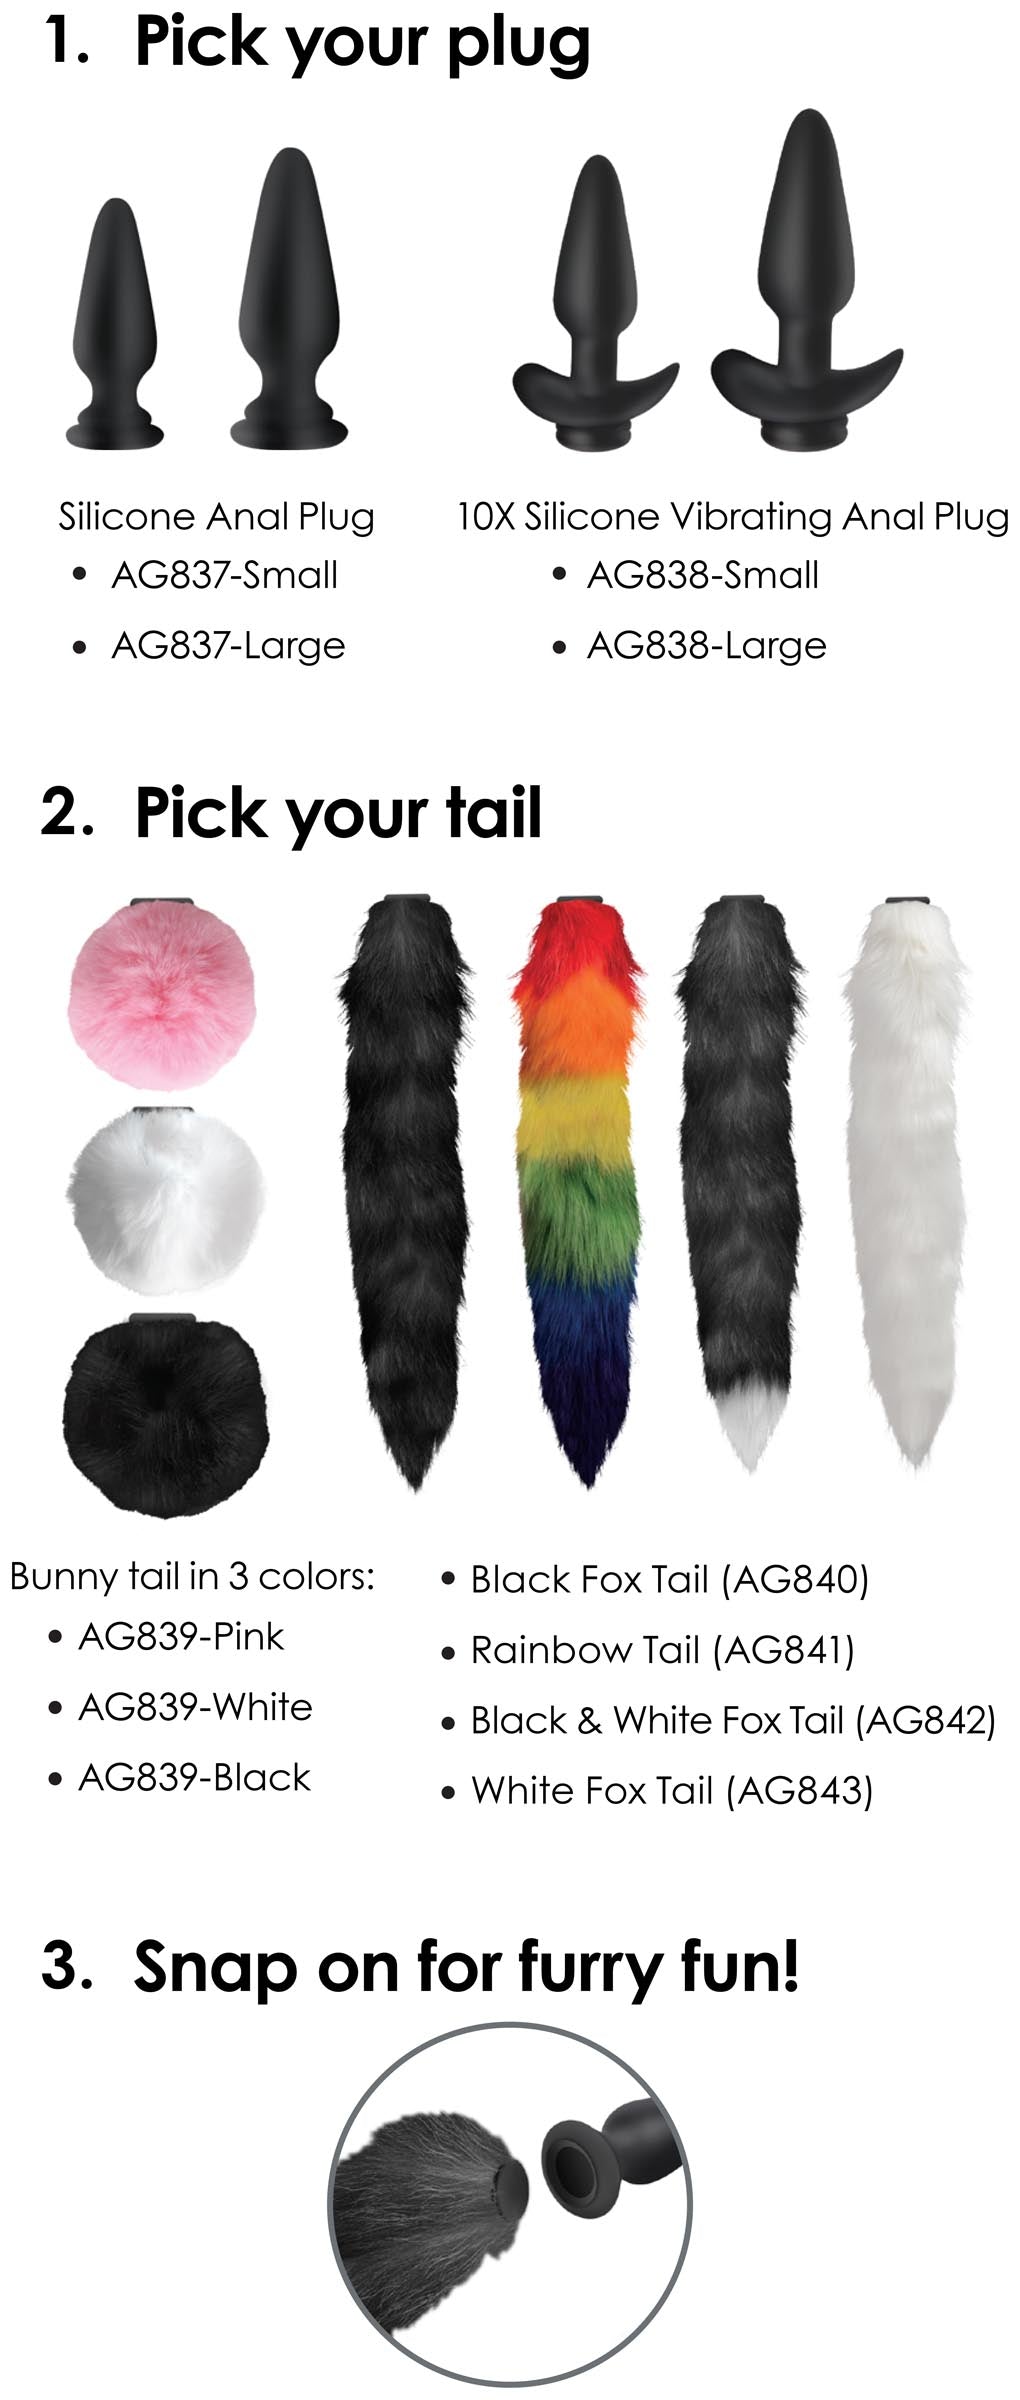 Small Anal Plug with Interchangeable Fox Tail - Black and White - UABDSM